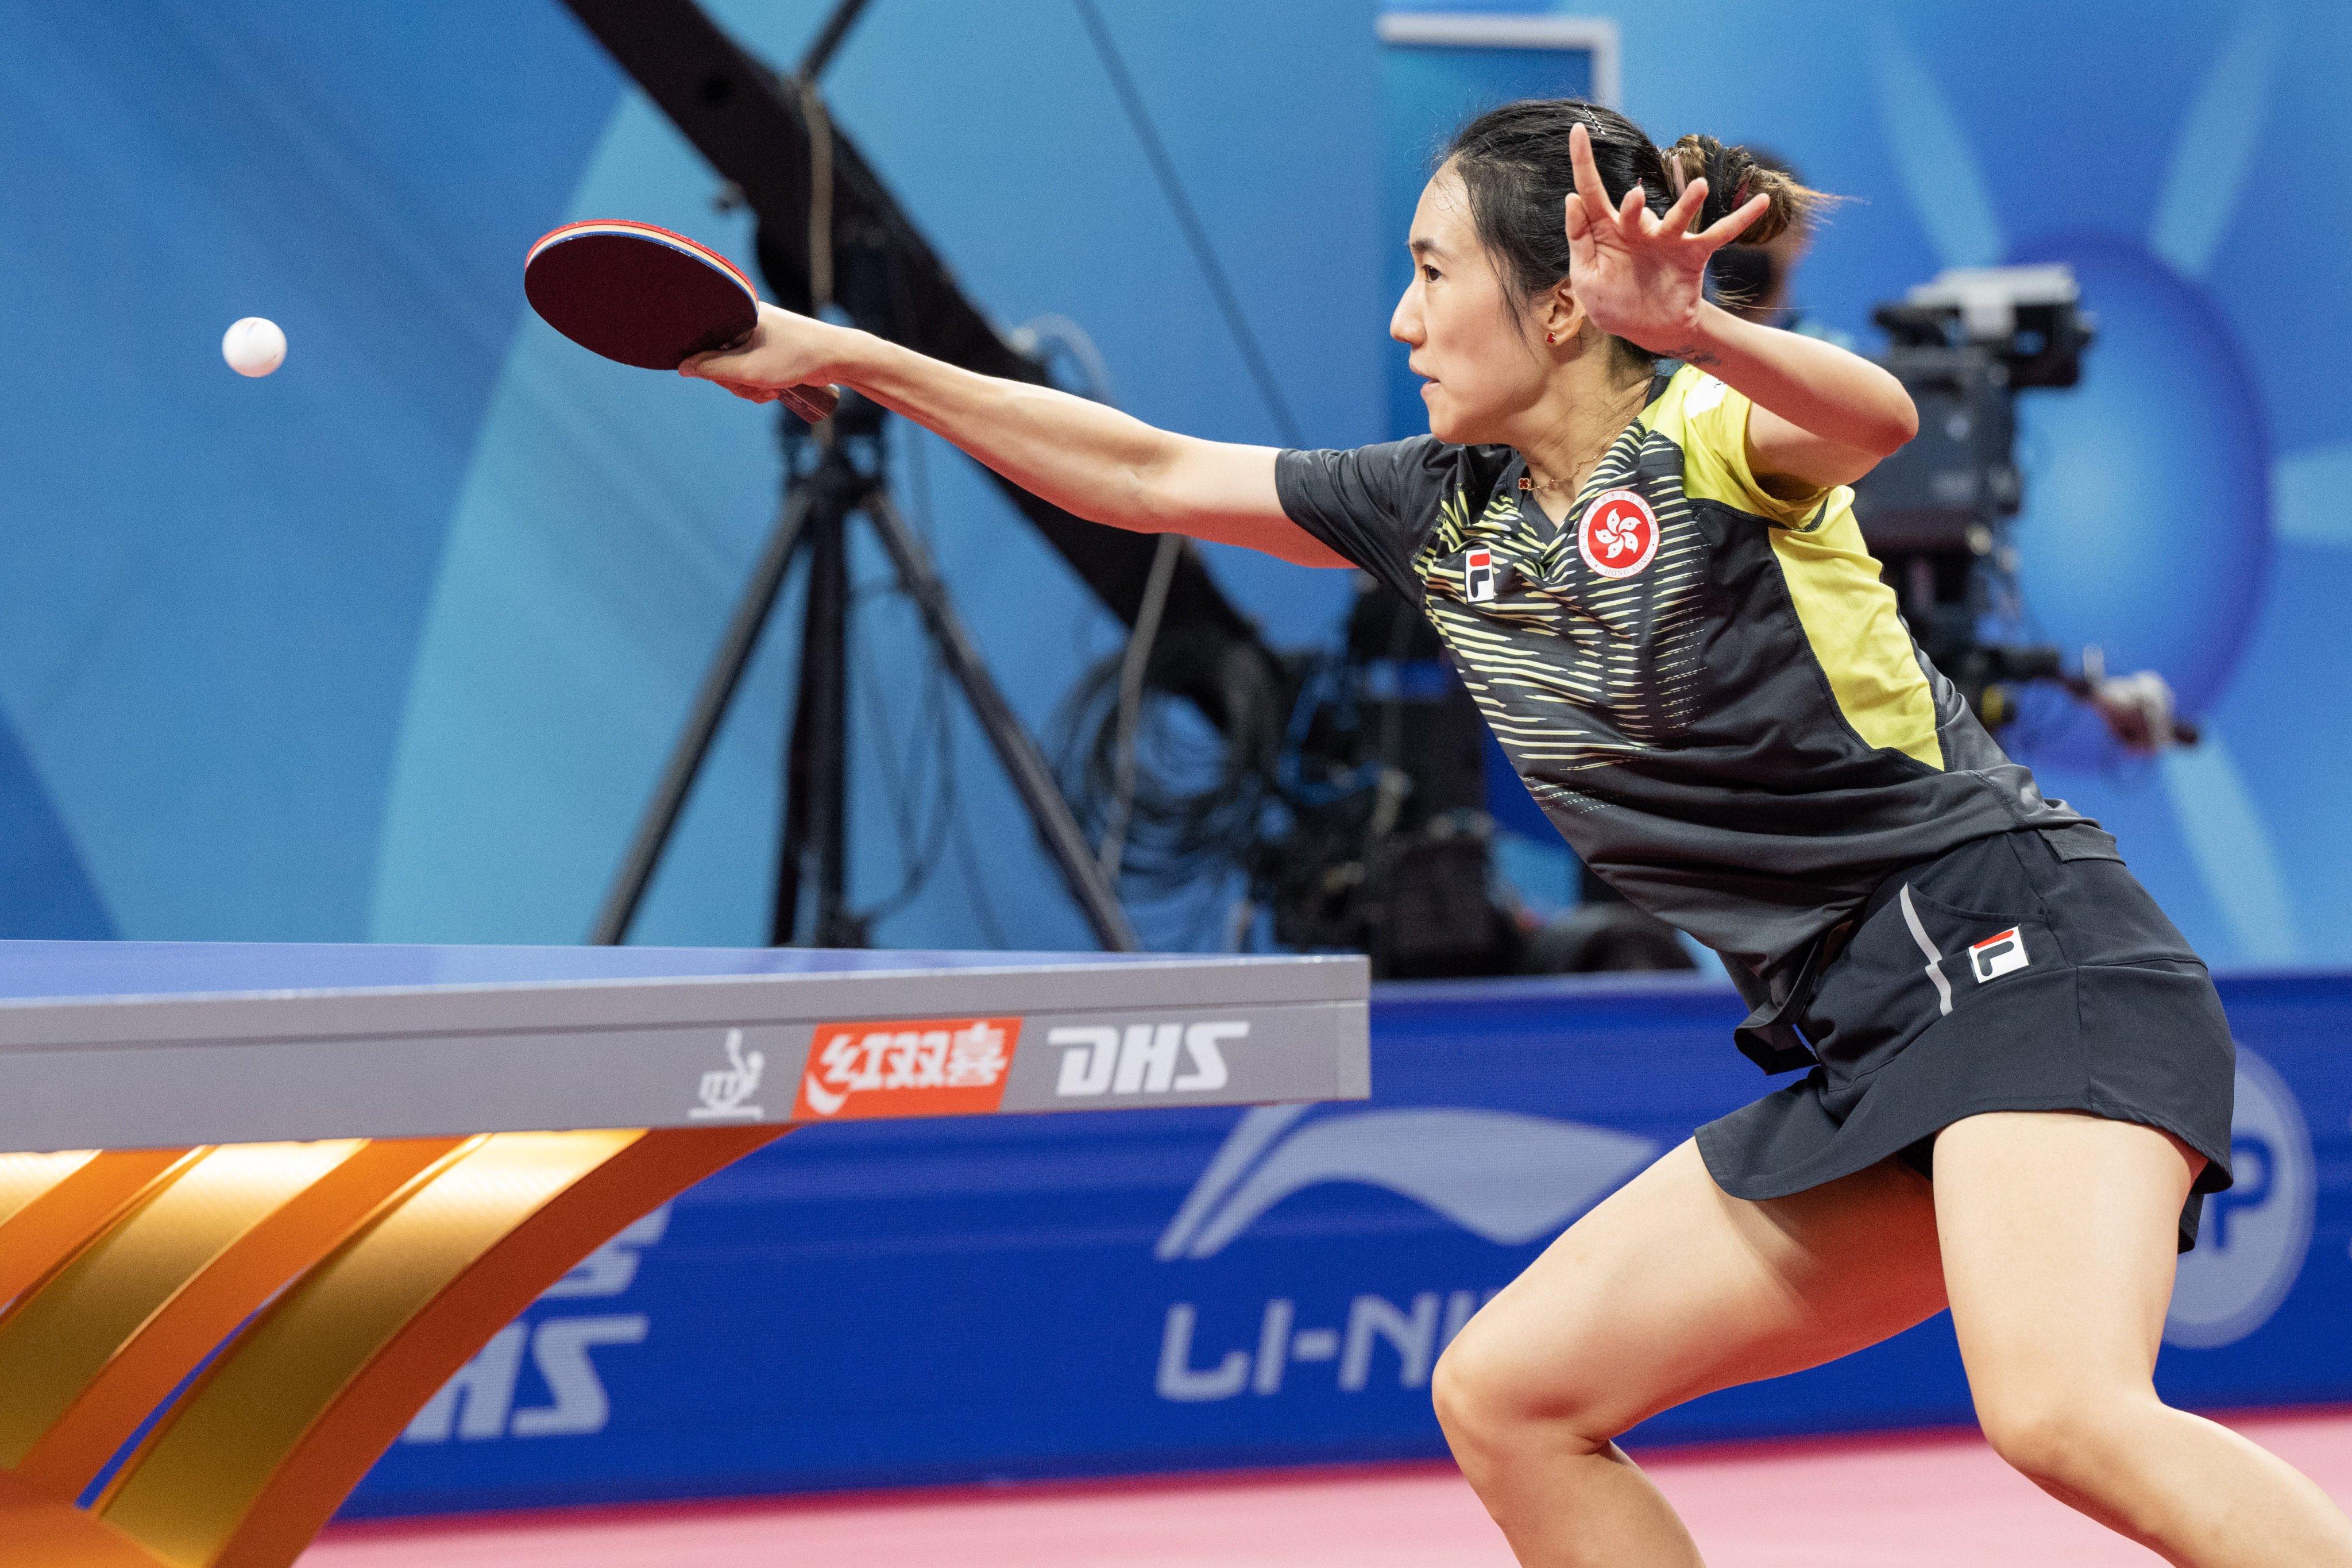 Zhu Chengzhu won two of her matches as Hong Kong came through a tough encounter against France at the World Team Table Tennis Championships. Photo: Xinhua